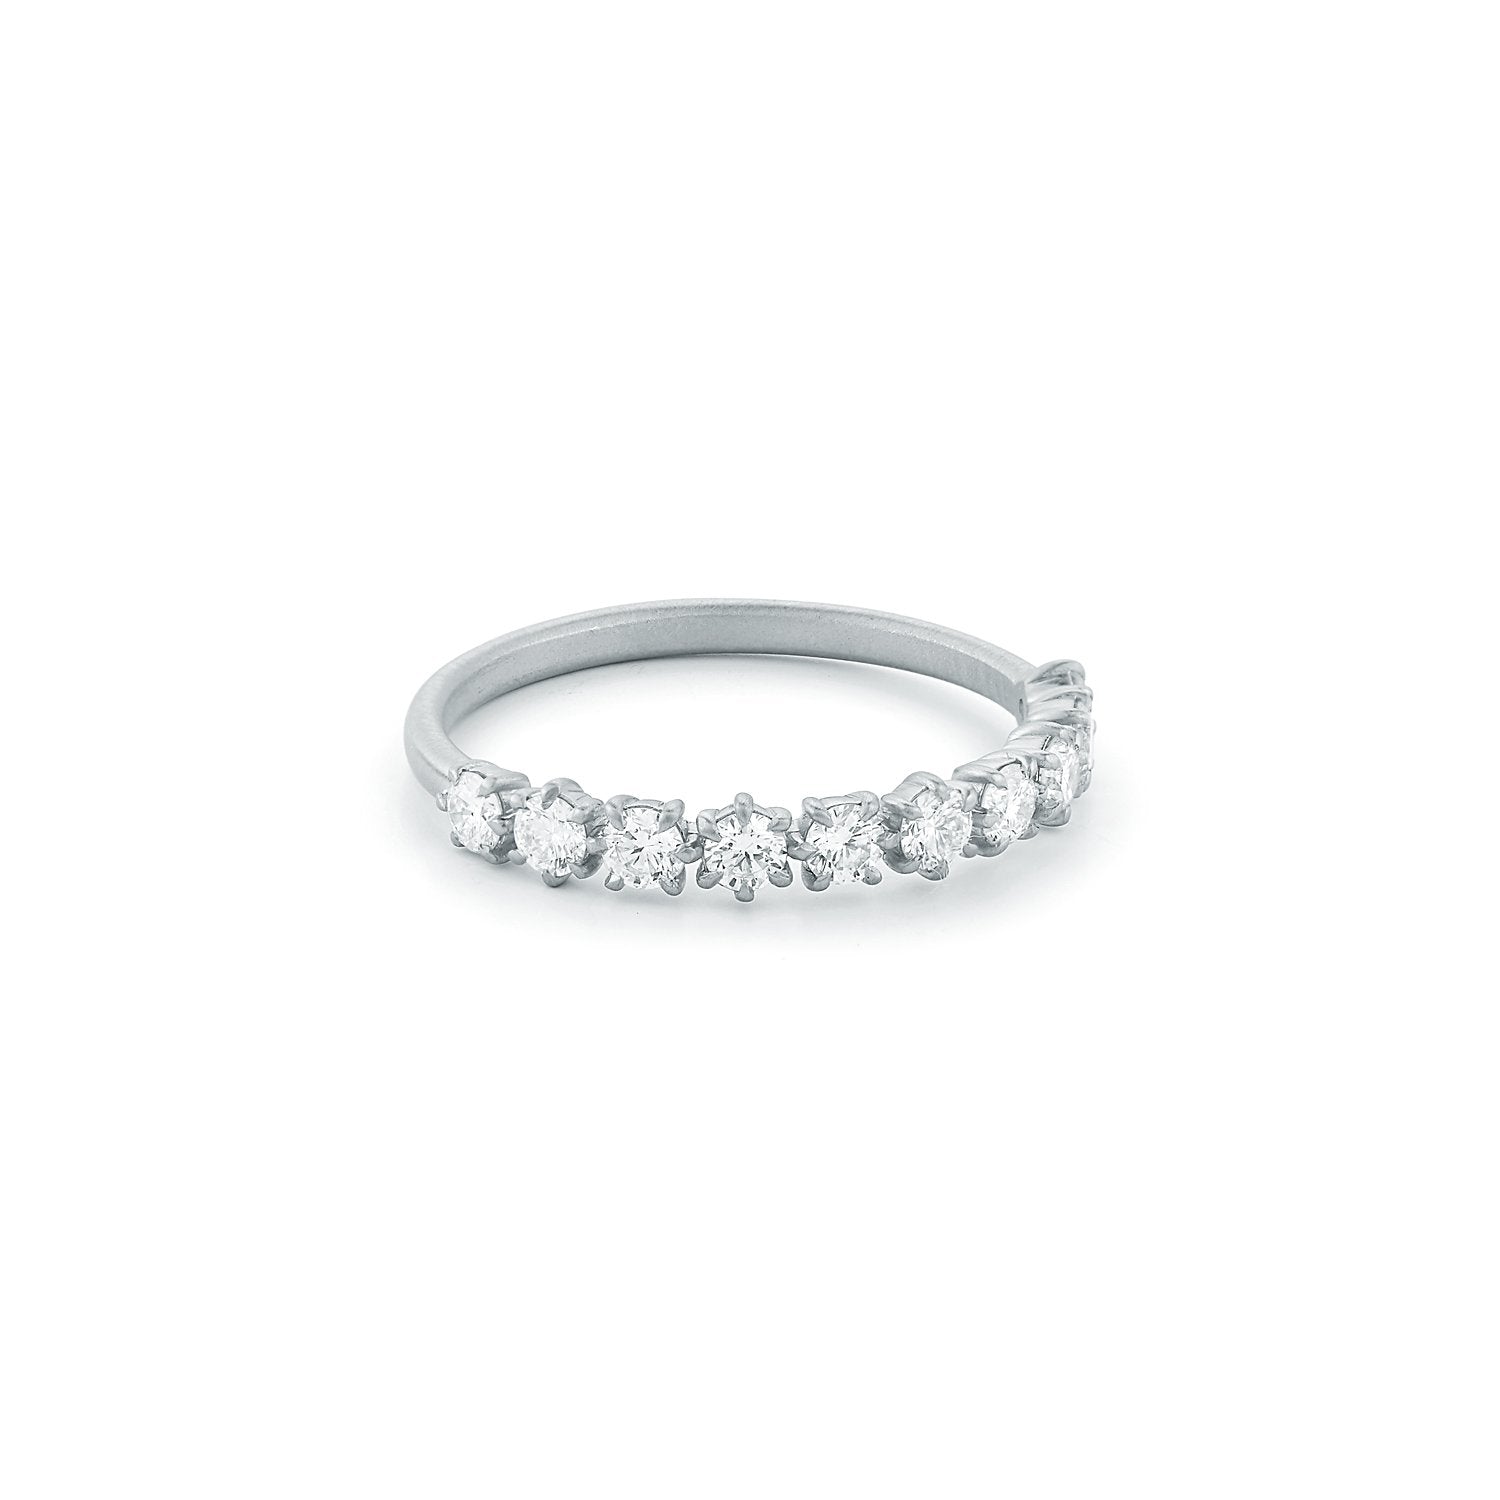 Catherine 1/2 Way Eternity No. 1 in 18K White Gold